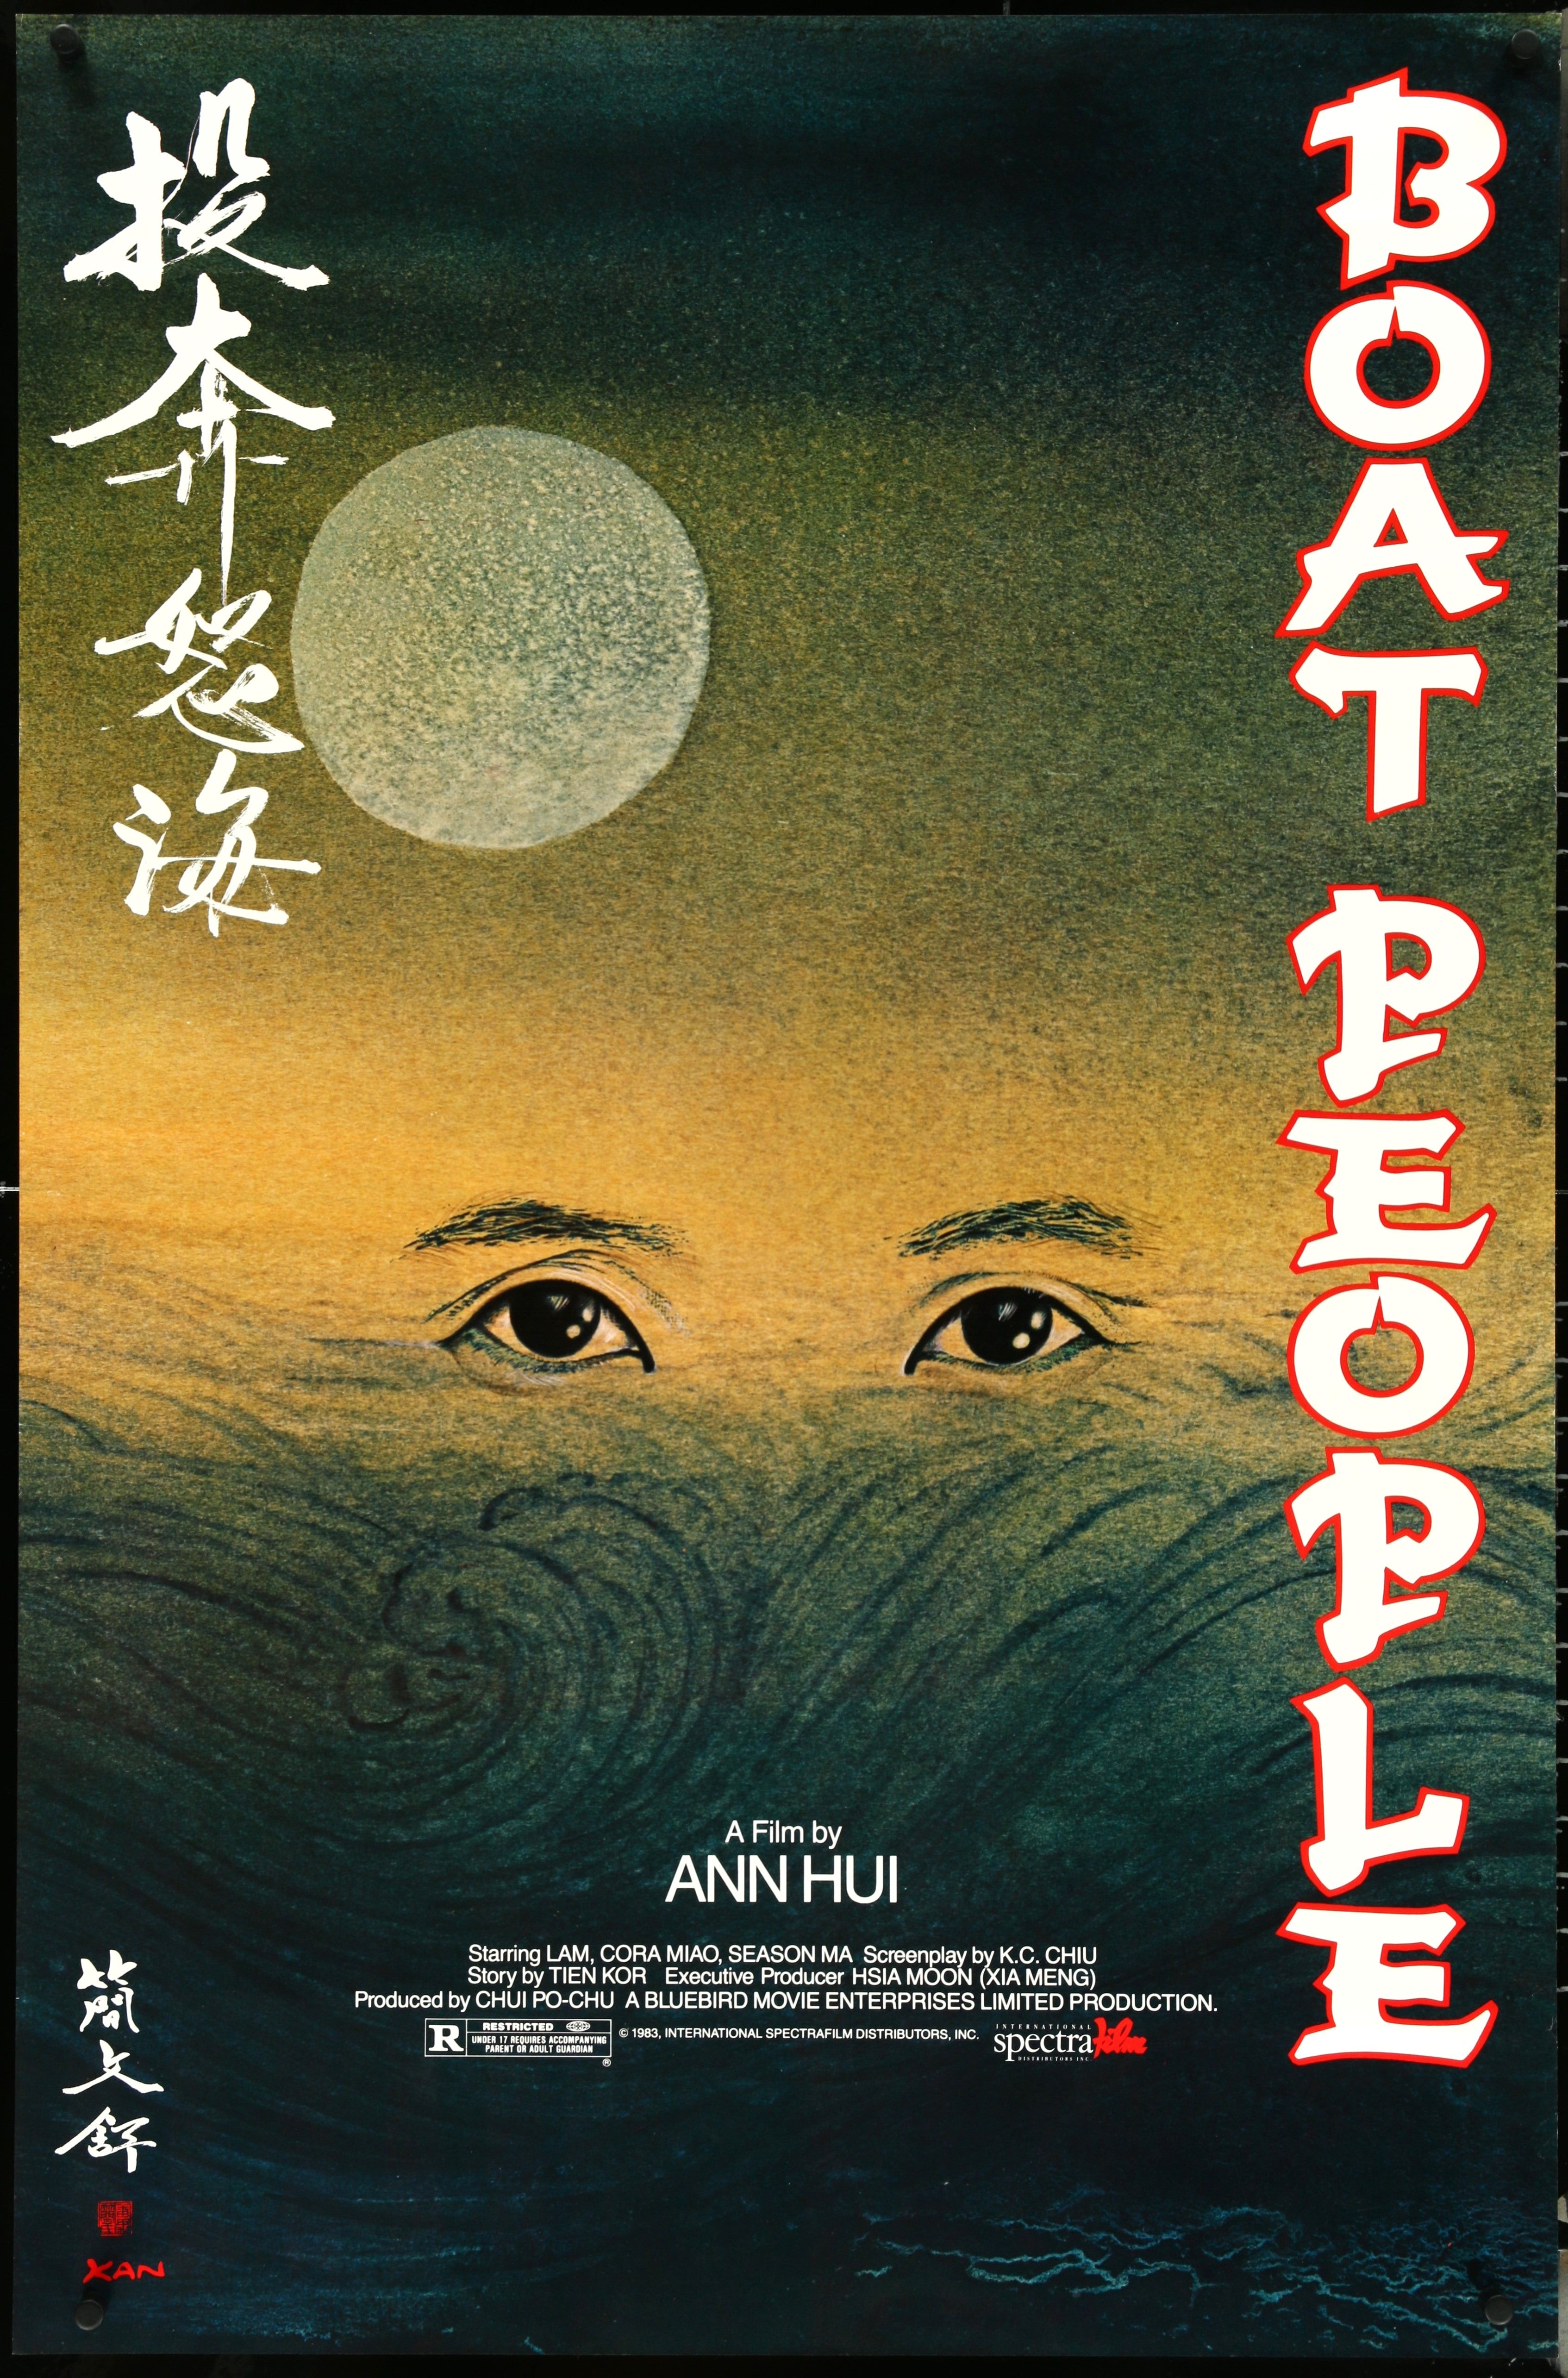 BOAT PEOPLE (1982)